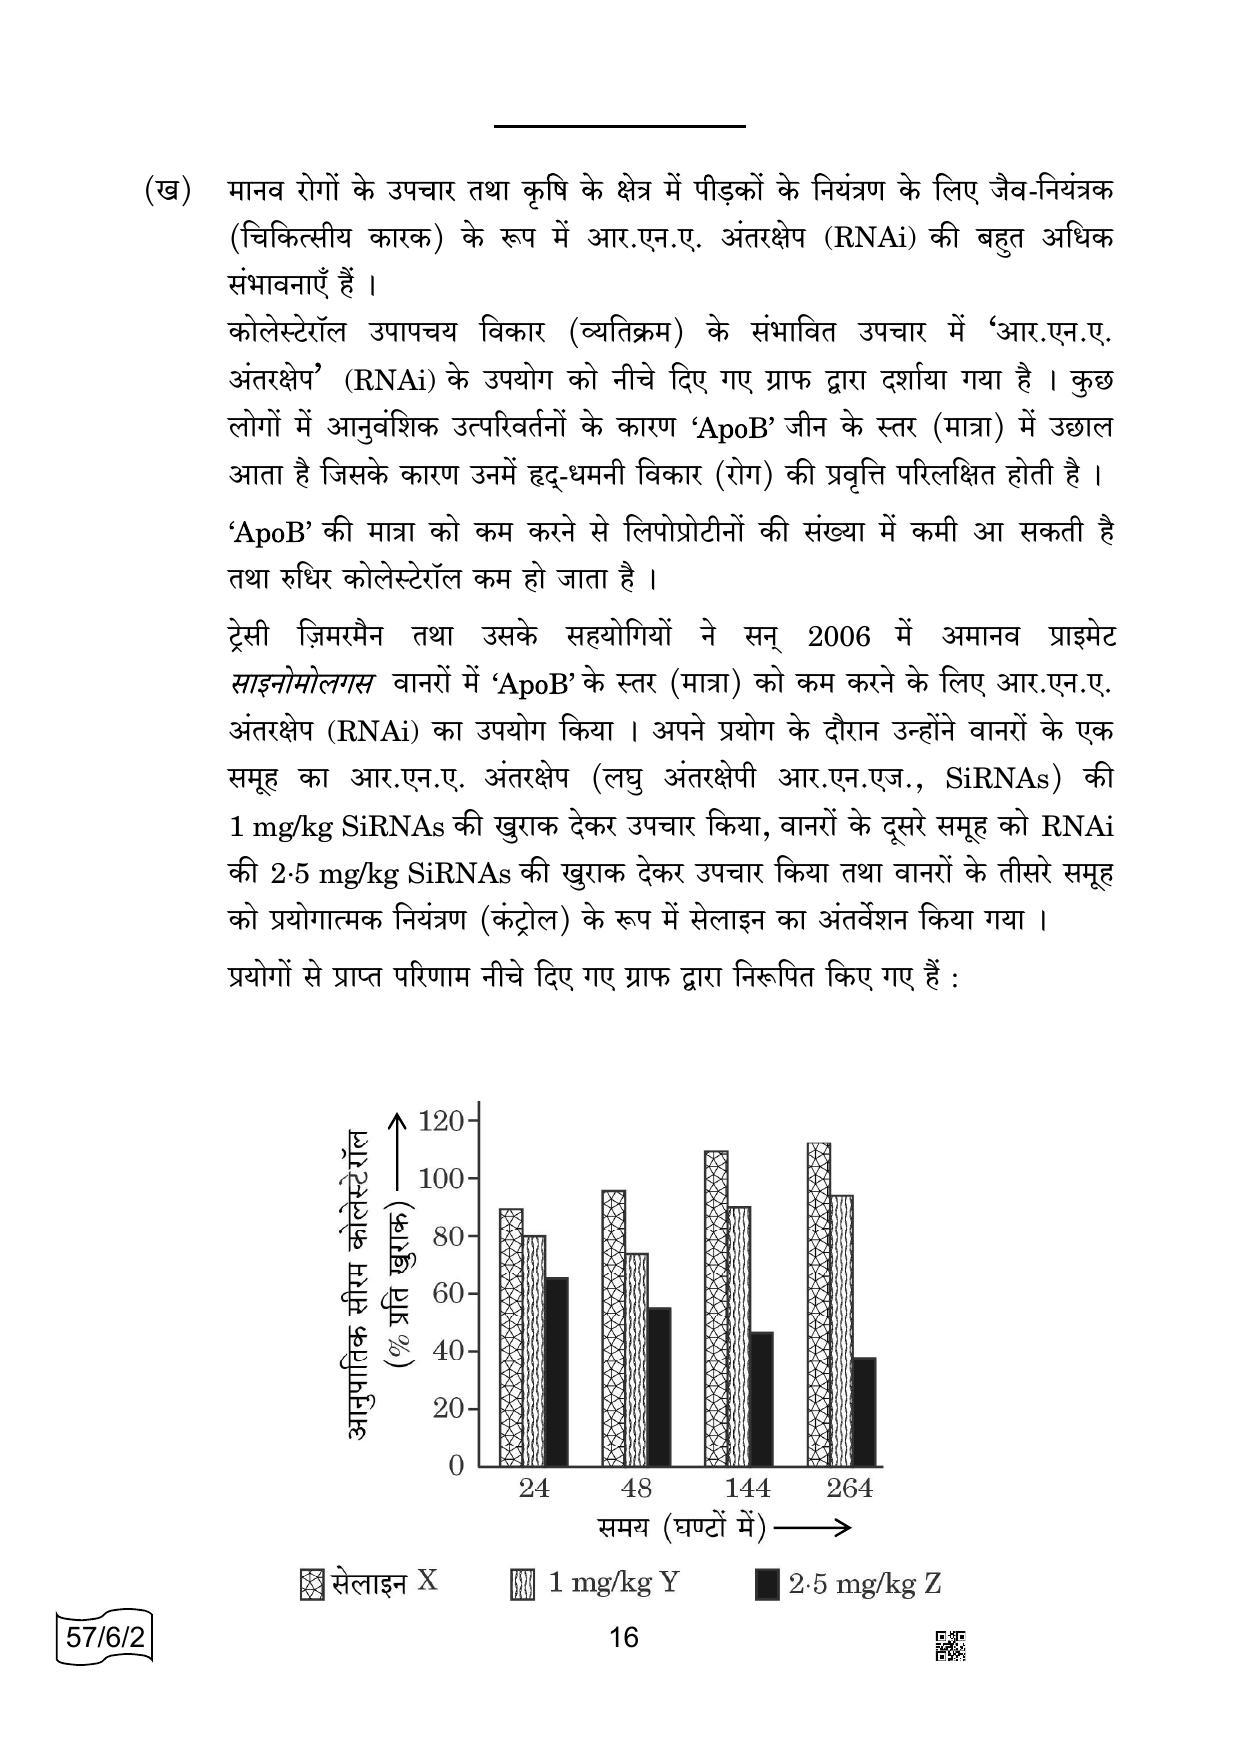 CBSE Class 12 57-6-2 BIOLOGY 2022 Compartment Question Paper - Page 16